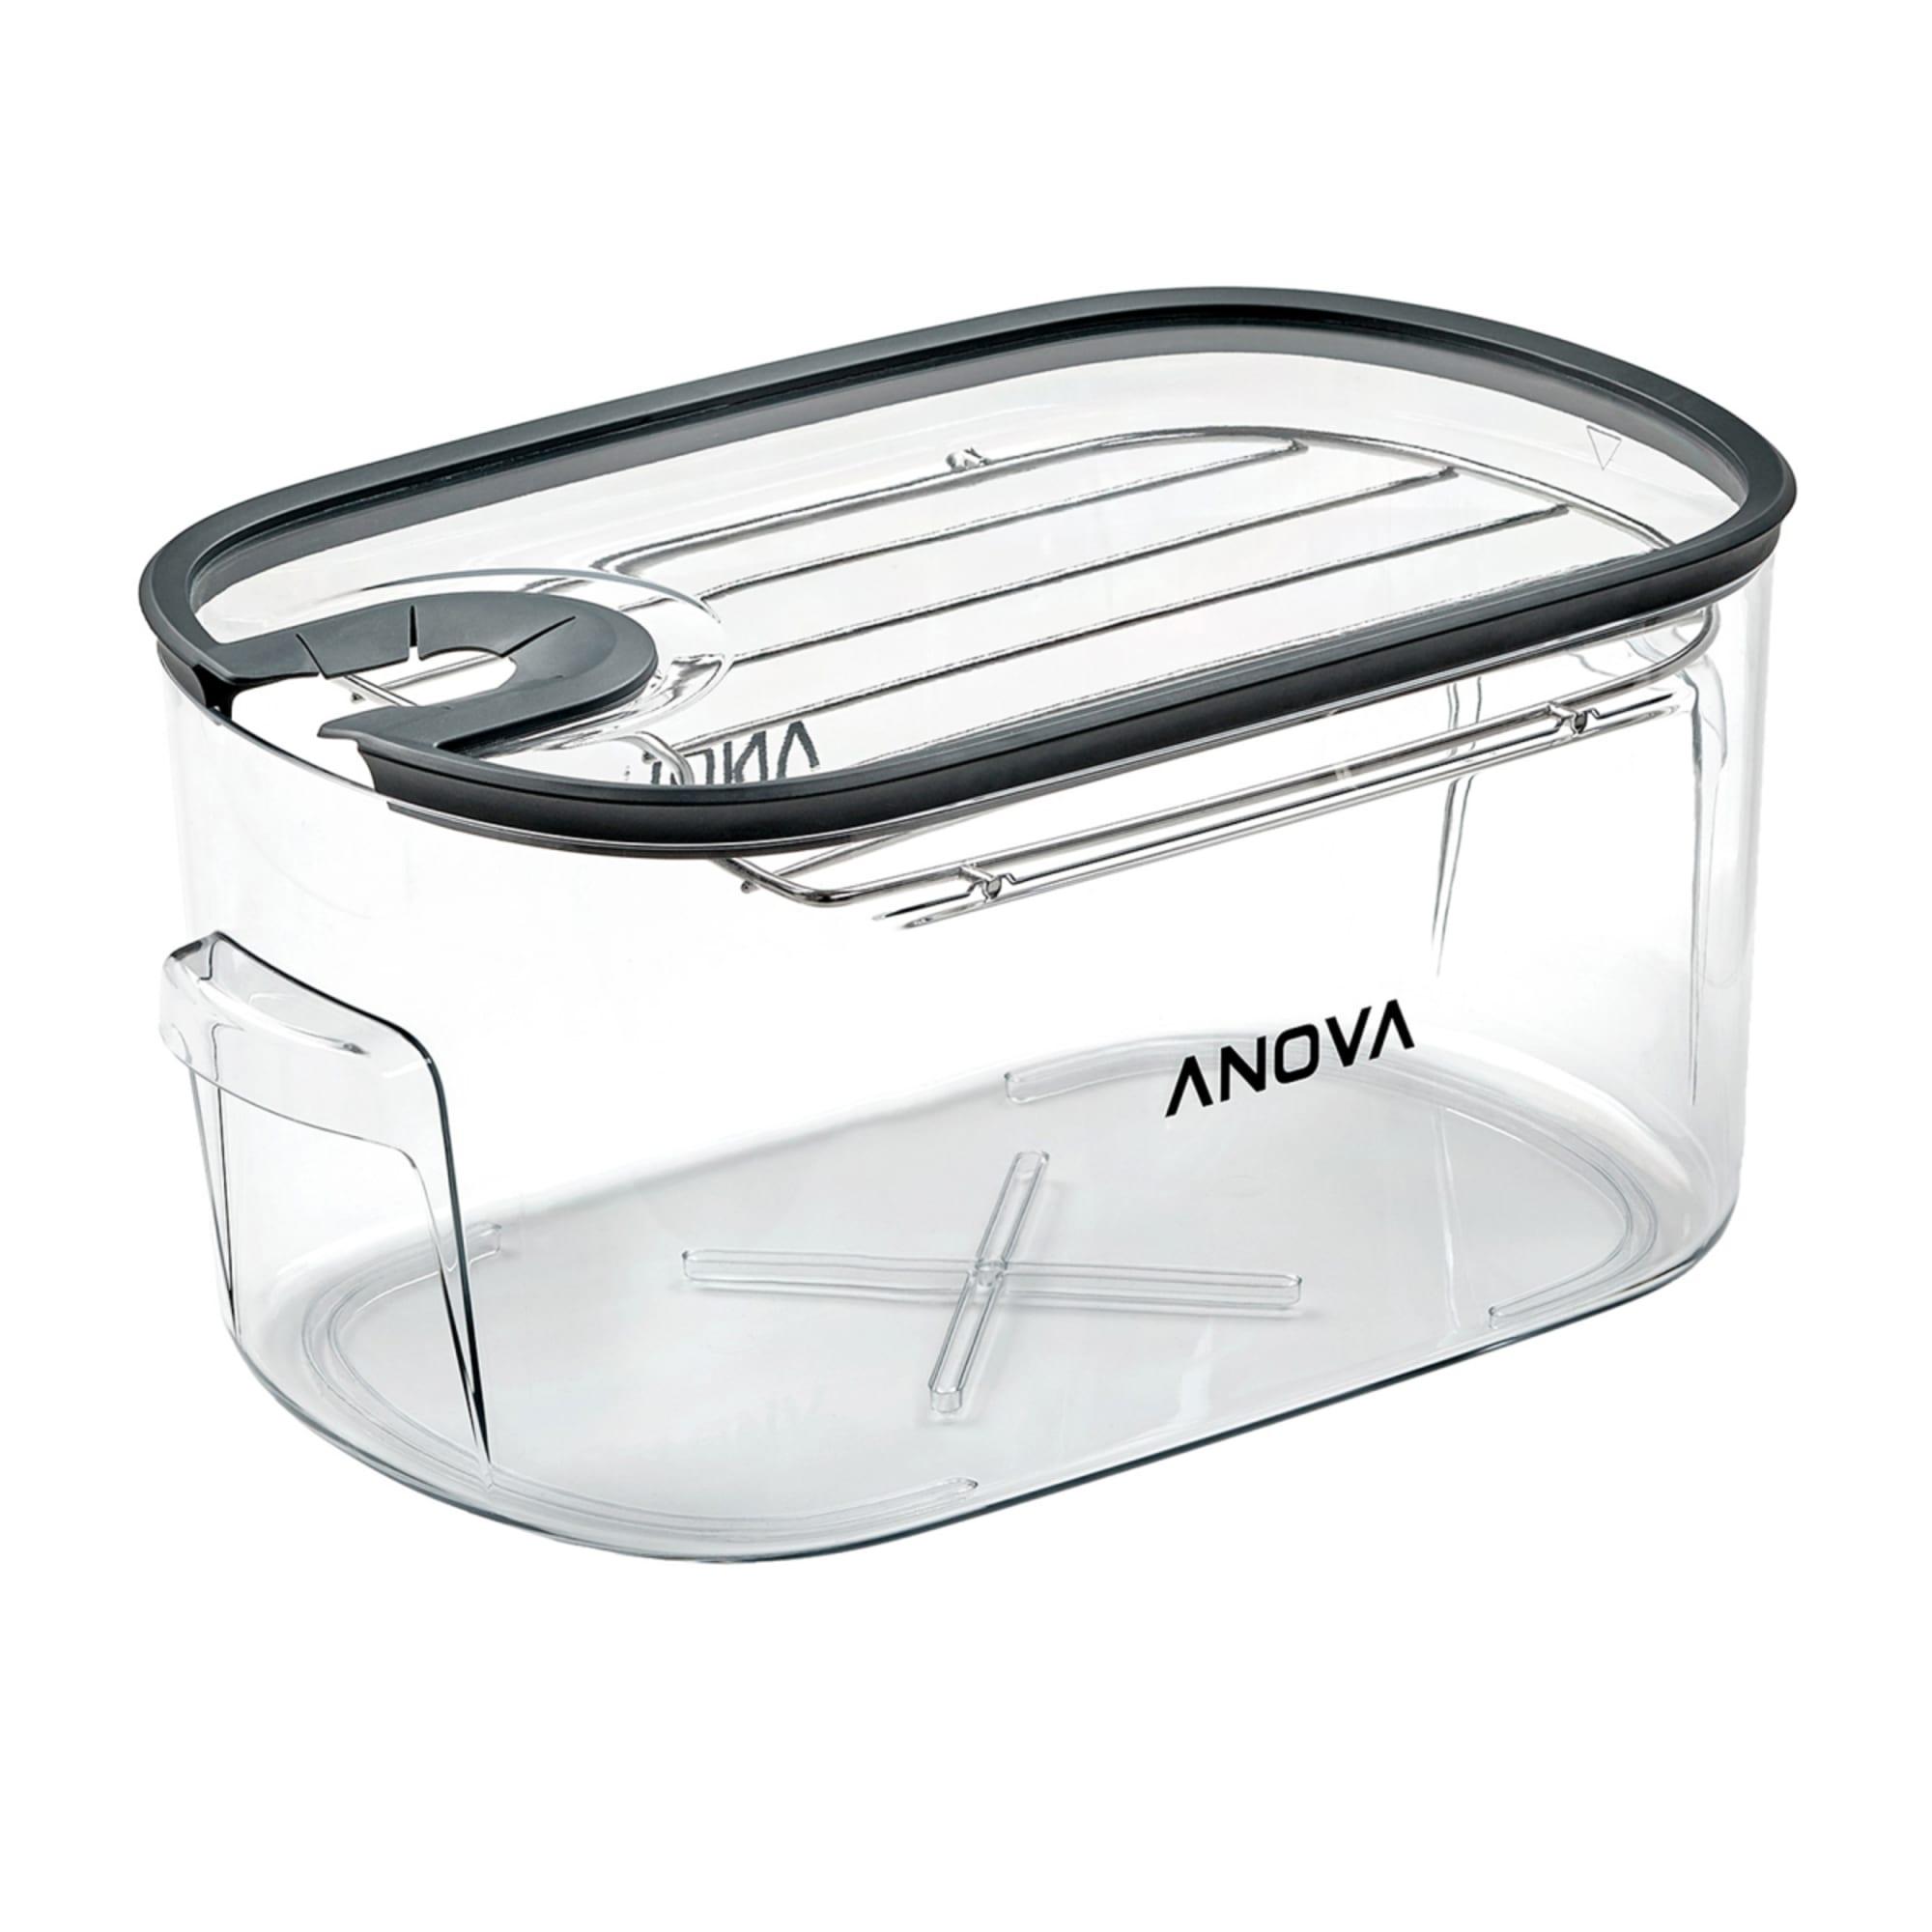 Anova Sous Vide Kit Cooker and Container Bundle Image 9